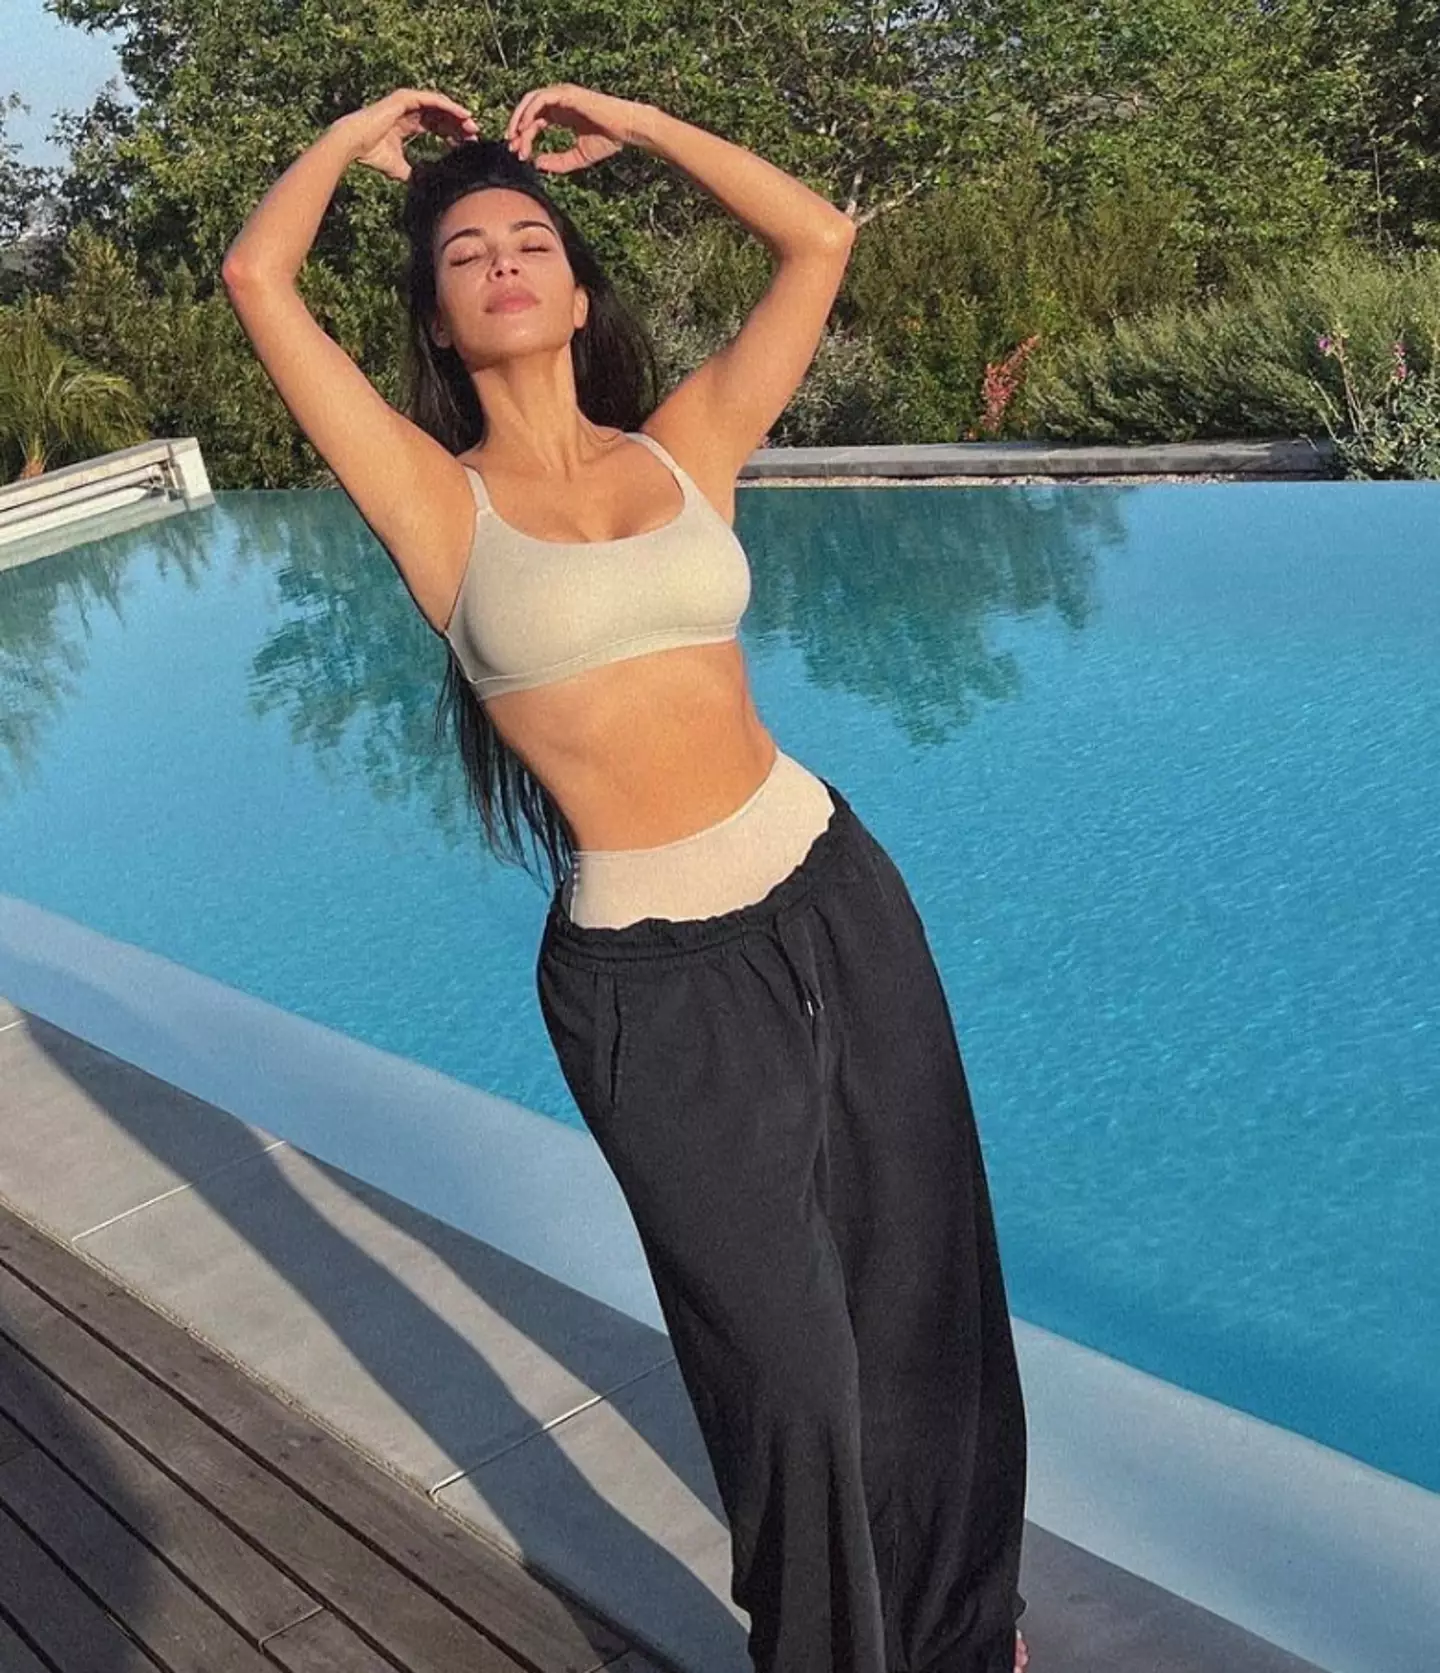 People accused Kim of Photoshopping her belly button (